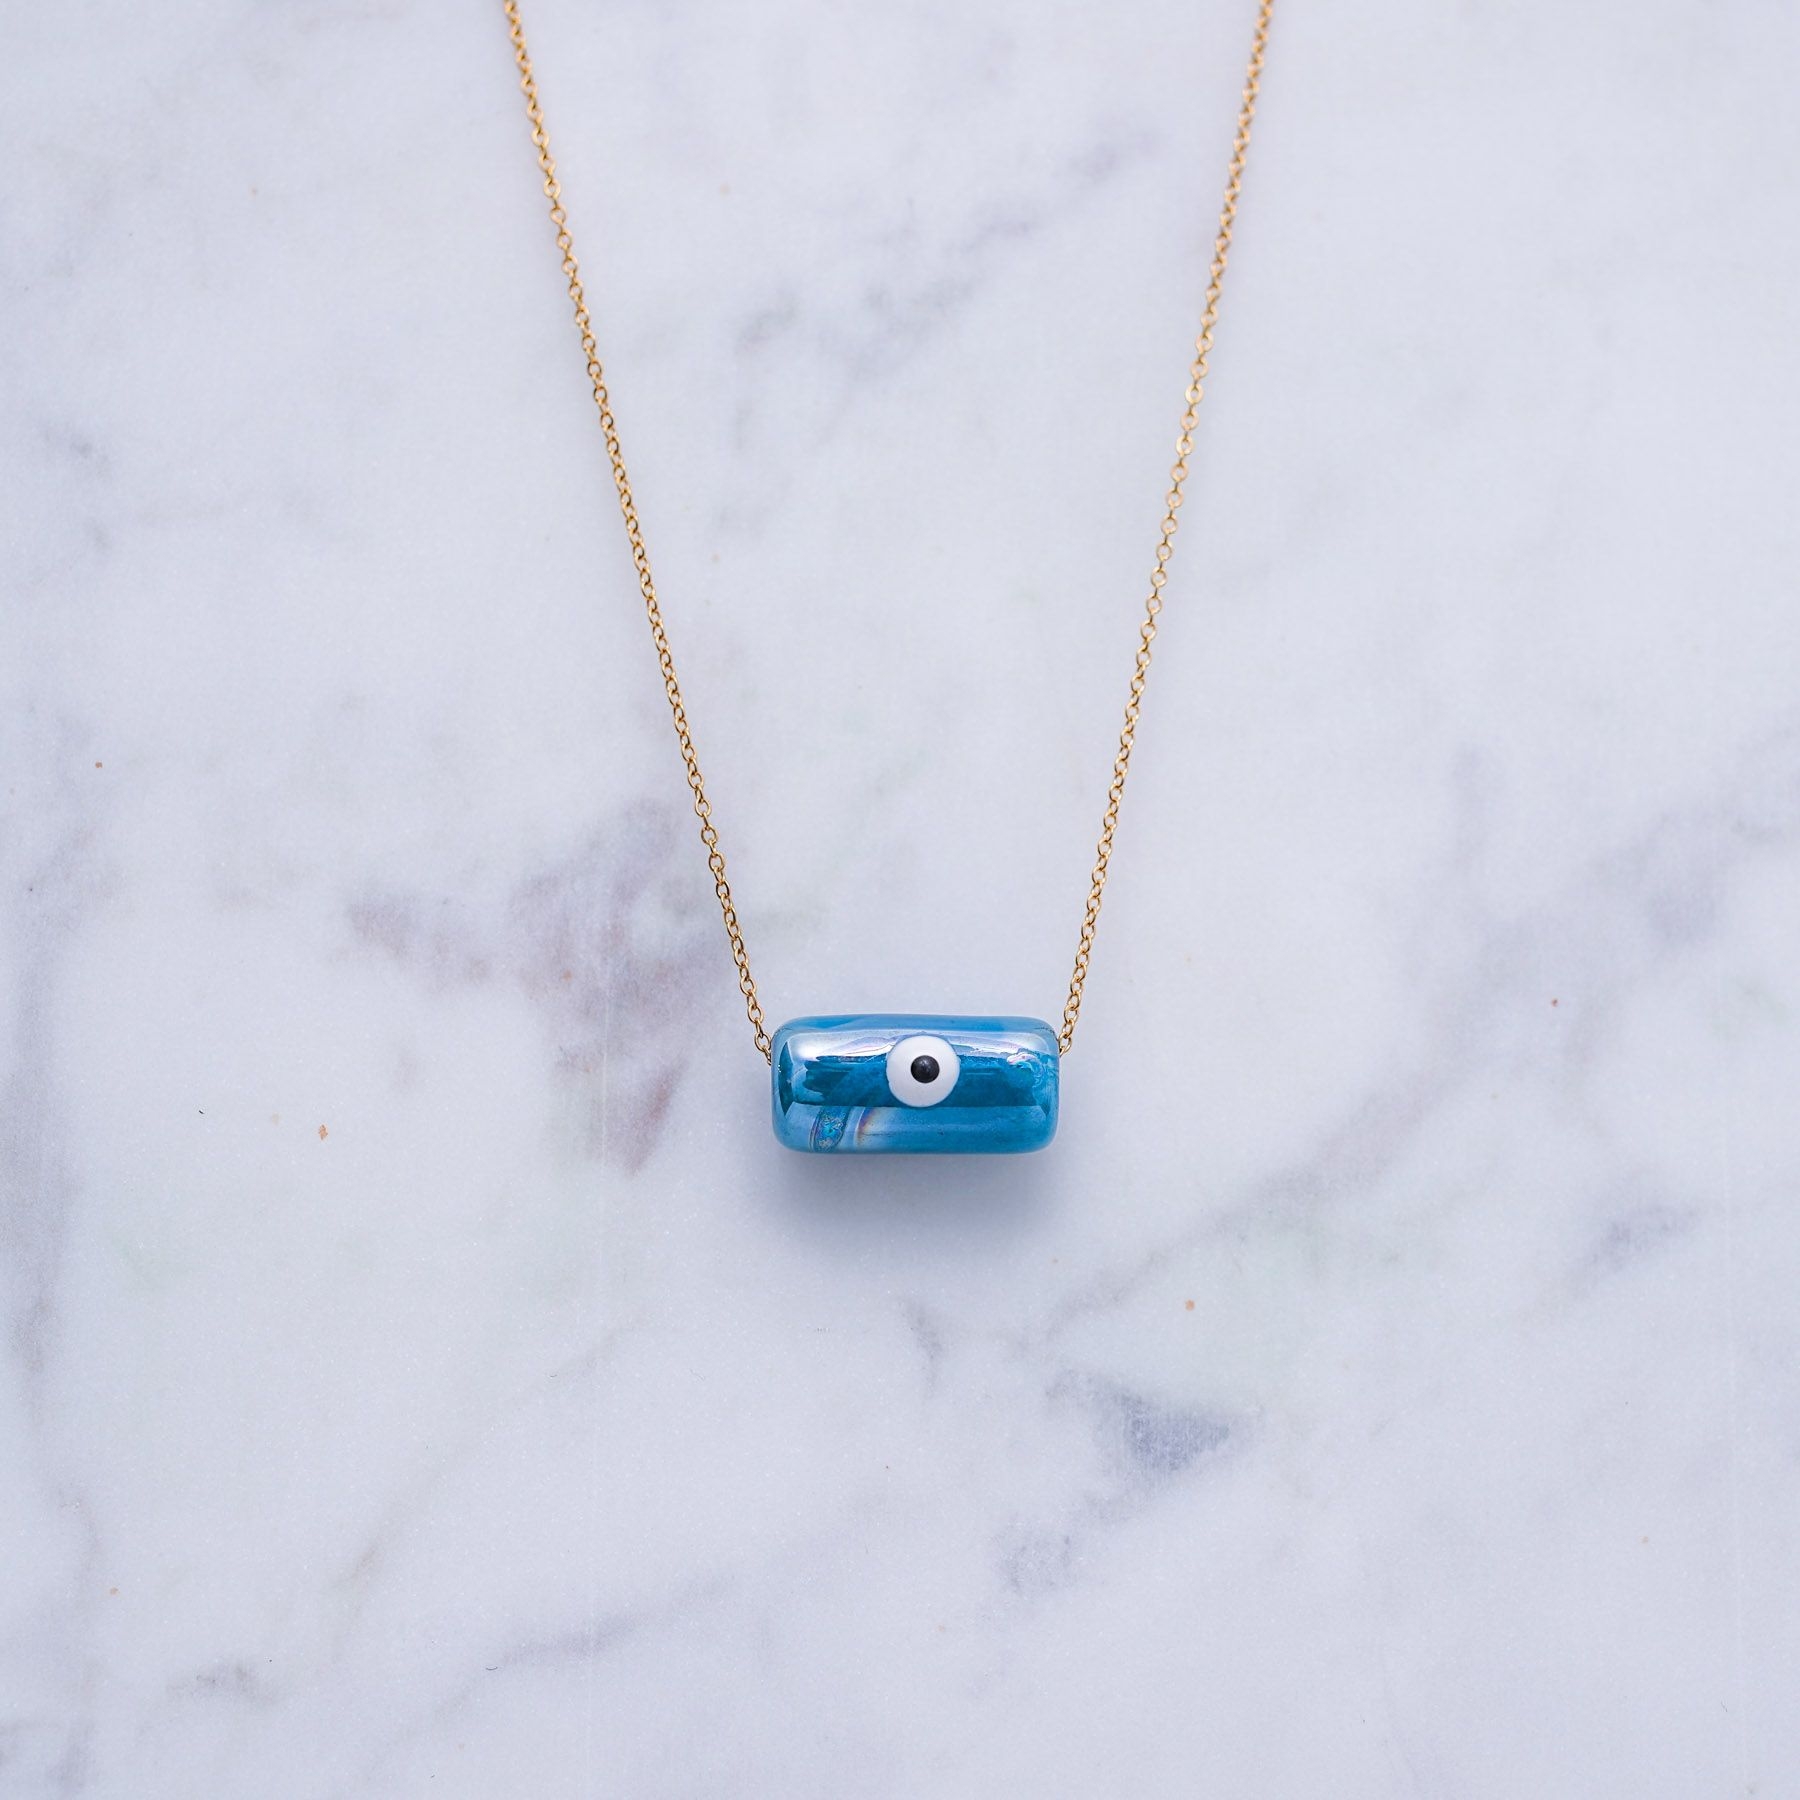 KYLINDROS NECKLACE - GOLD & PEARL BLUE ' - ' CUBES